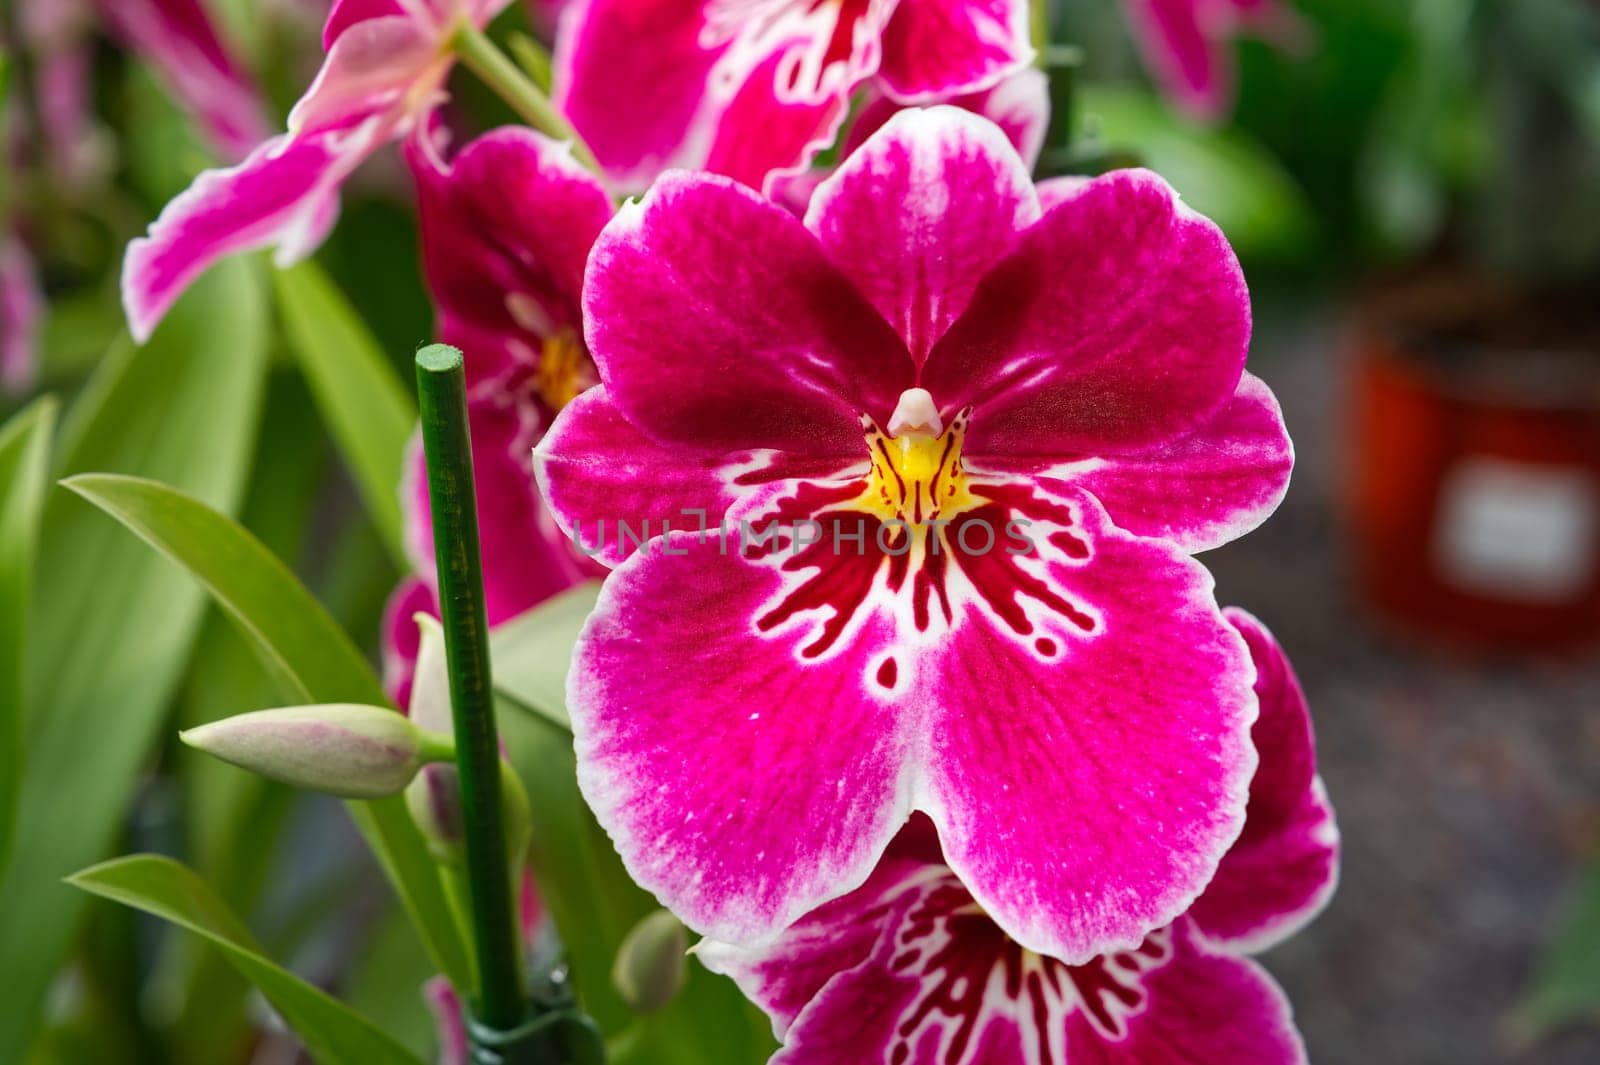 Vibrant pink orchids in full bloom, showing delicate petals and vibrant color. This close-up shot captures the beauty of tropical floral nature, perfect for botanical, spa, or nature-themed designs.